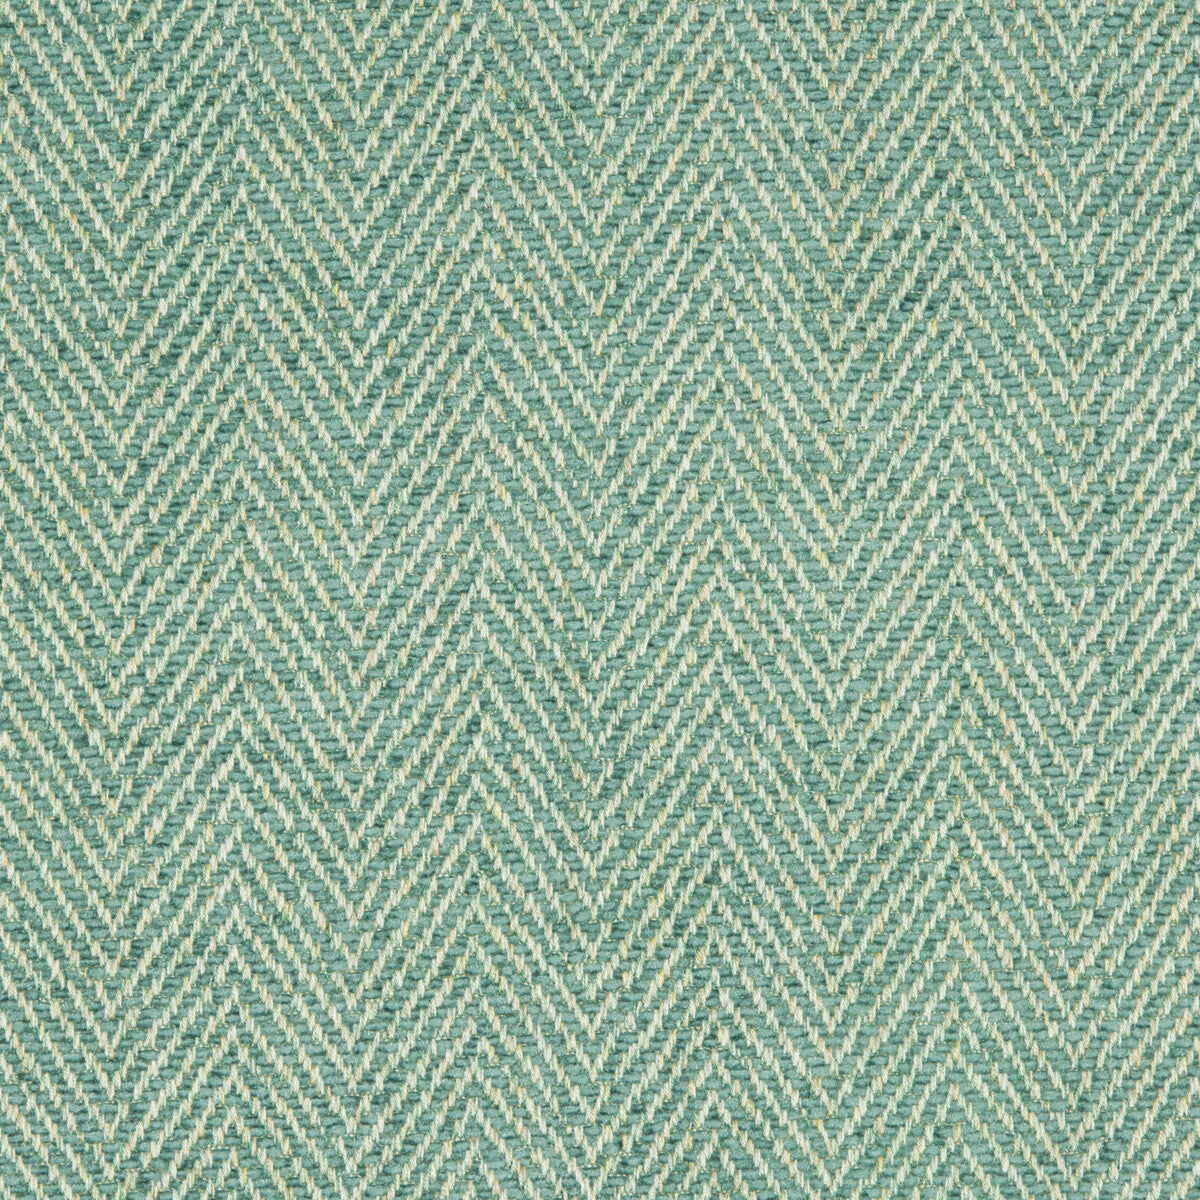 Firle Chenille II fabric in aqua color - pattern 8017140.13.0 - by Brunschwig &amp; Fils in the Baronet collection